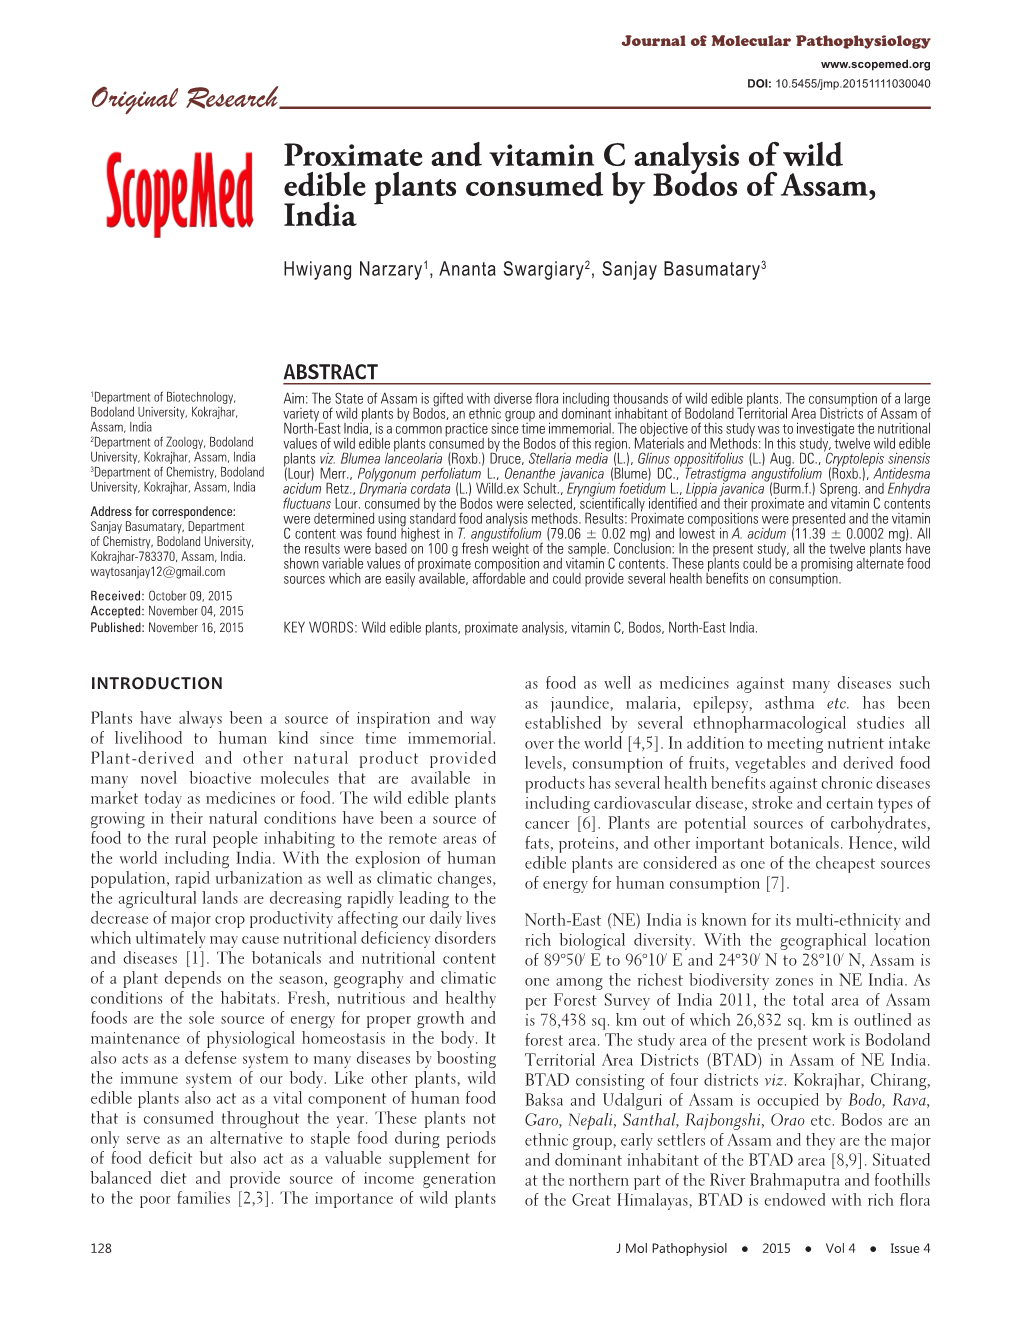 Proximate and Vitamin C Analysis of Wild Edible Plants Consumed by Bodos of Assam, India